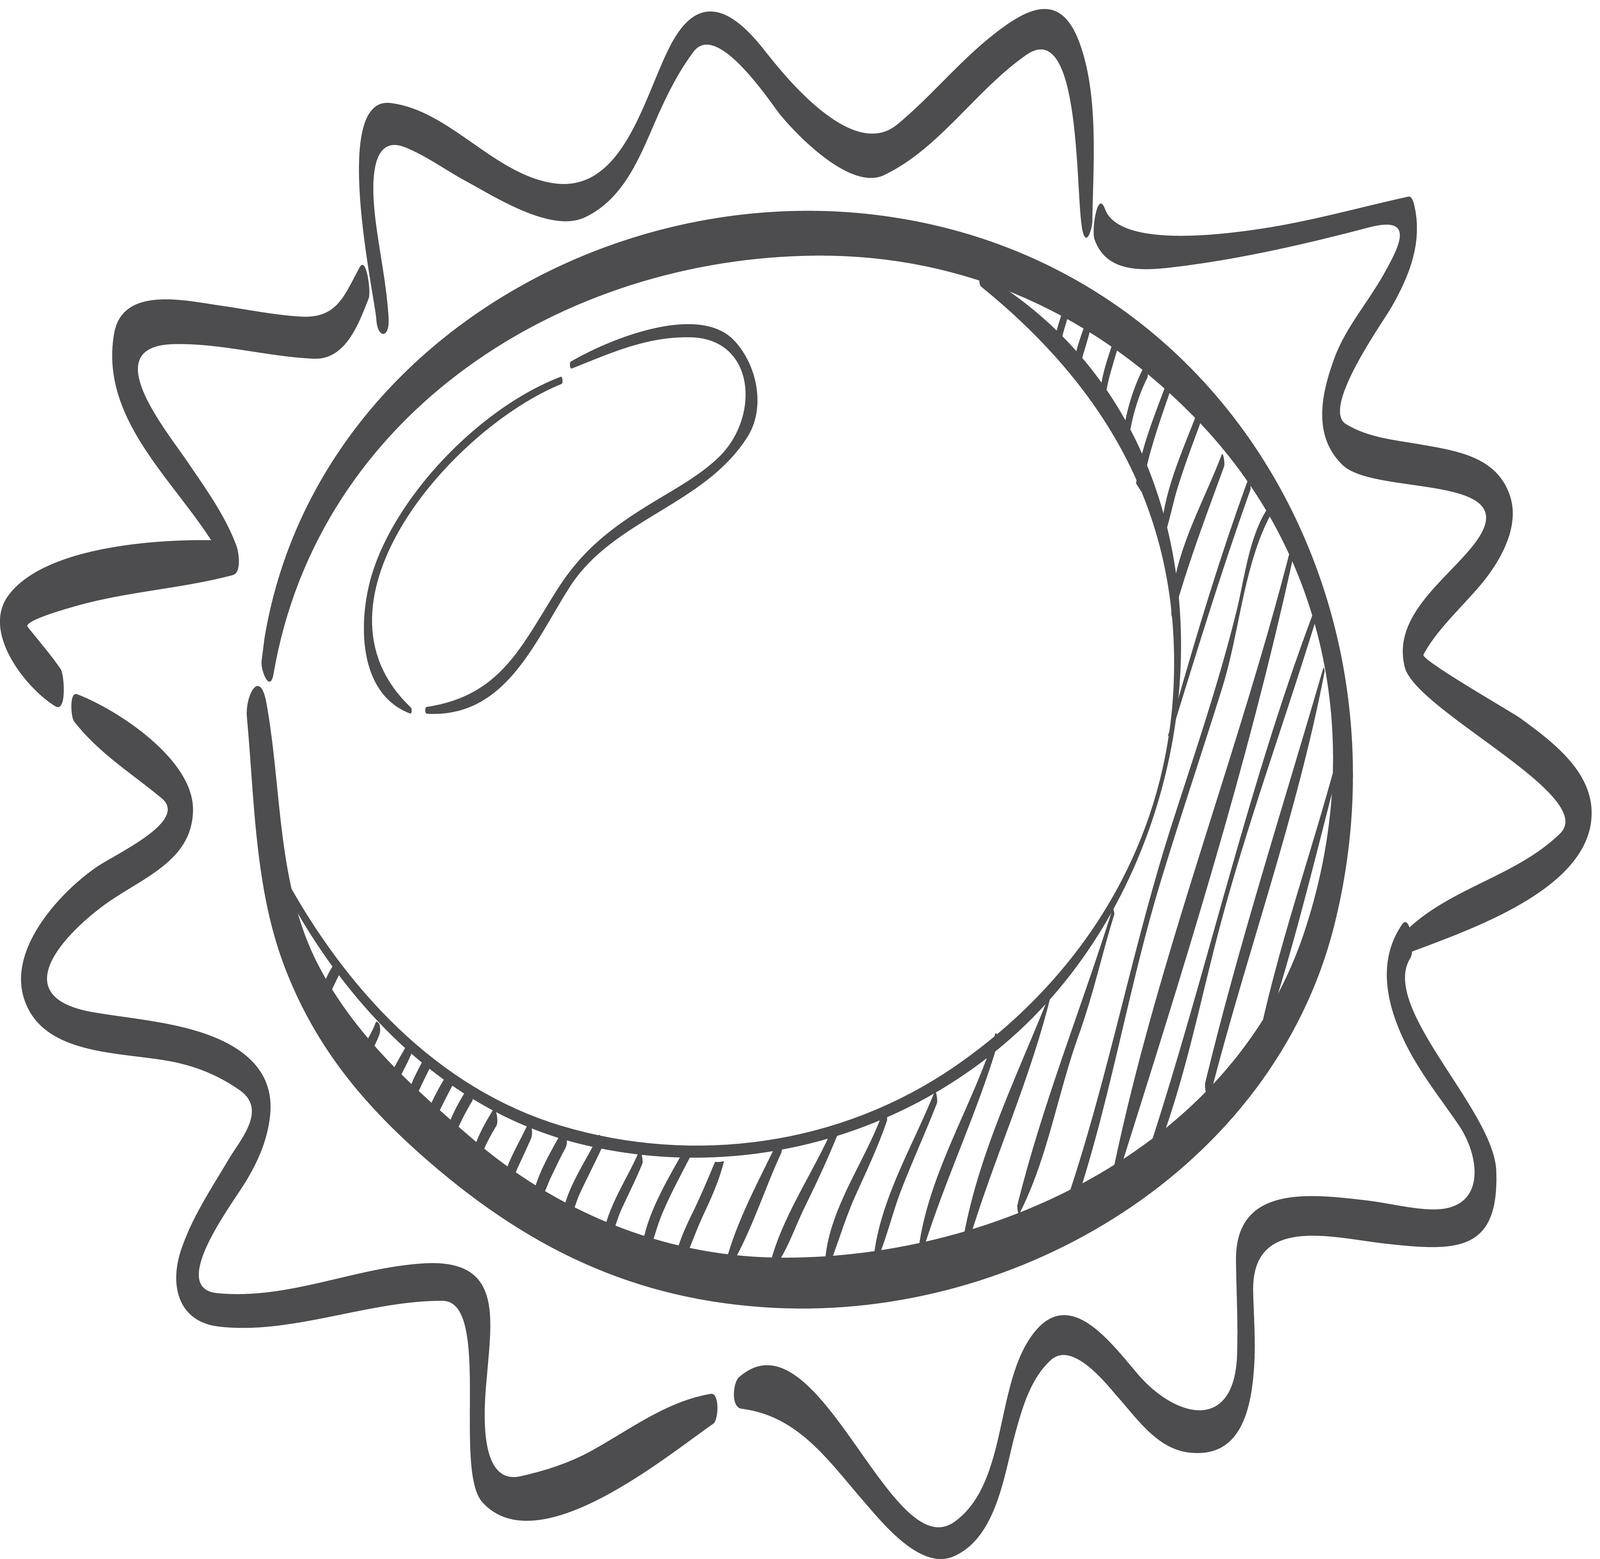 Sketch icon - Forecast sunny by puruan